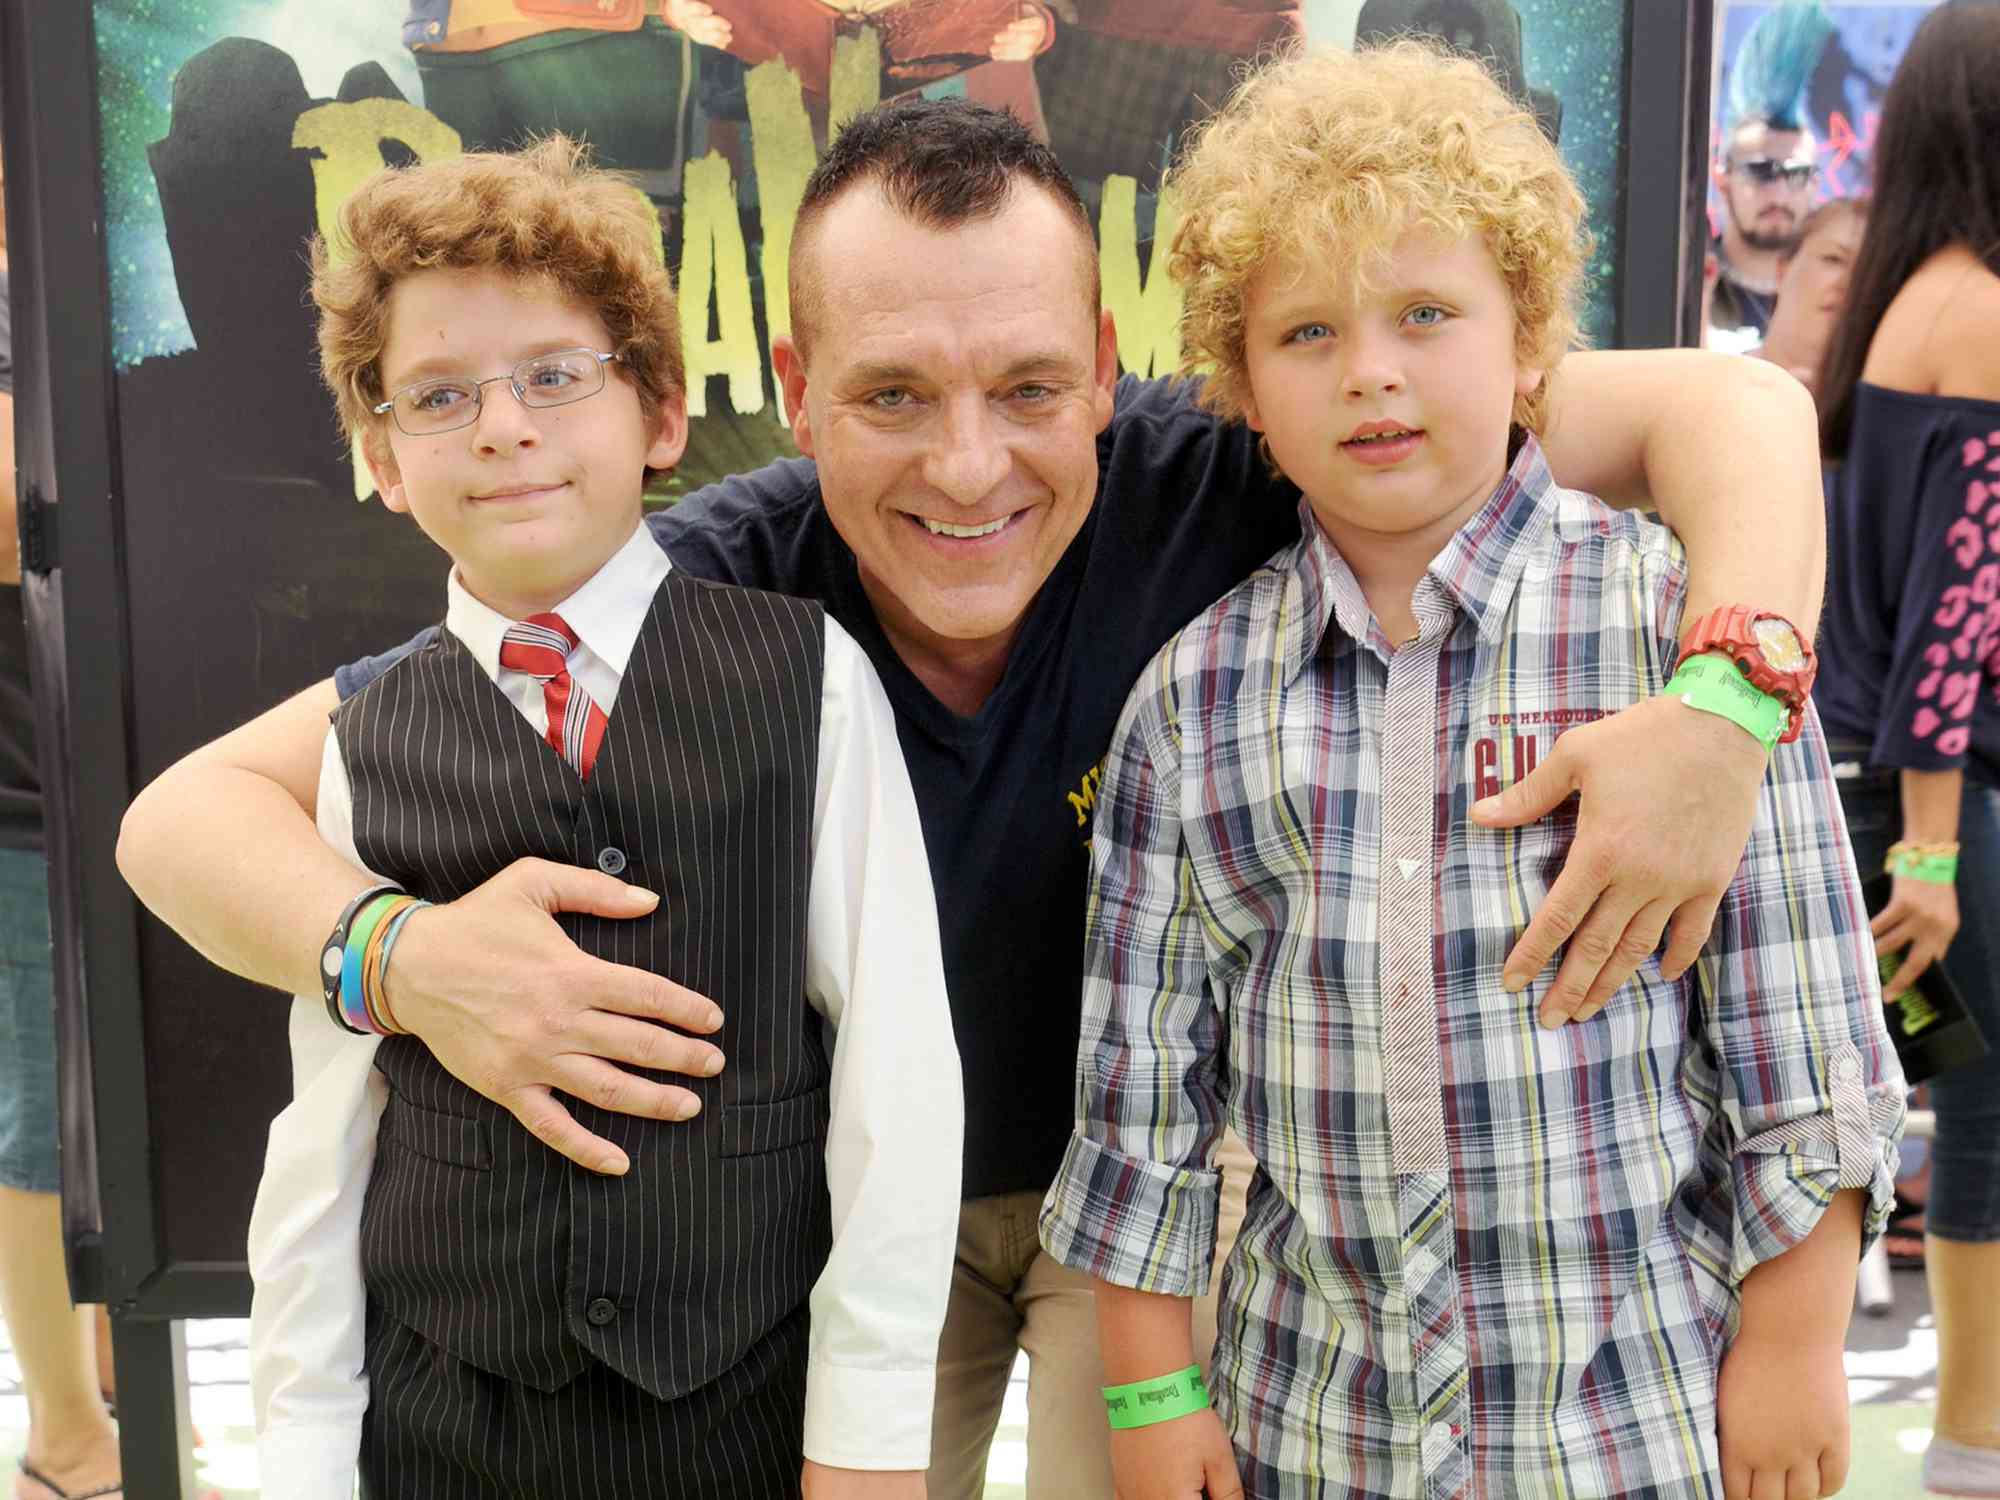 Tom Sizemore and kids arrive at the Los Angeles premiere of "ParaNorman" at AMC CityWalk Stadium 19 at Universal Studios Hollywood on August 5, 2012 in Universal City, California